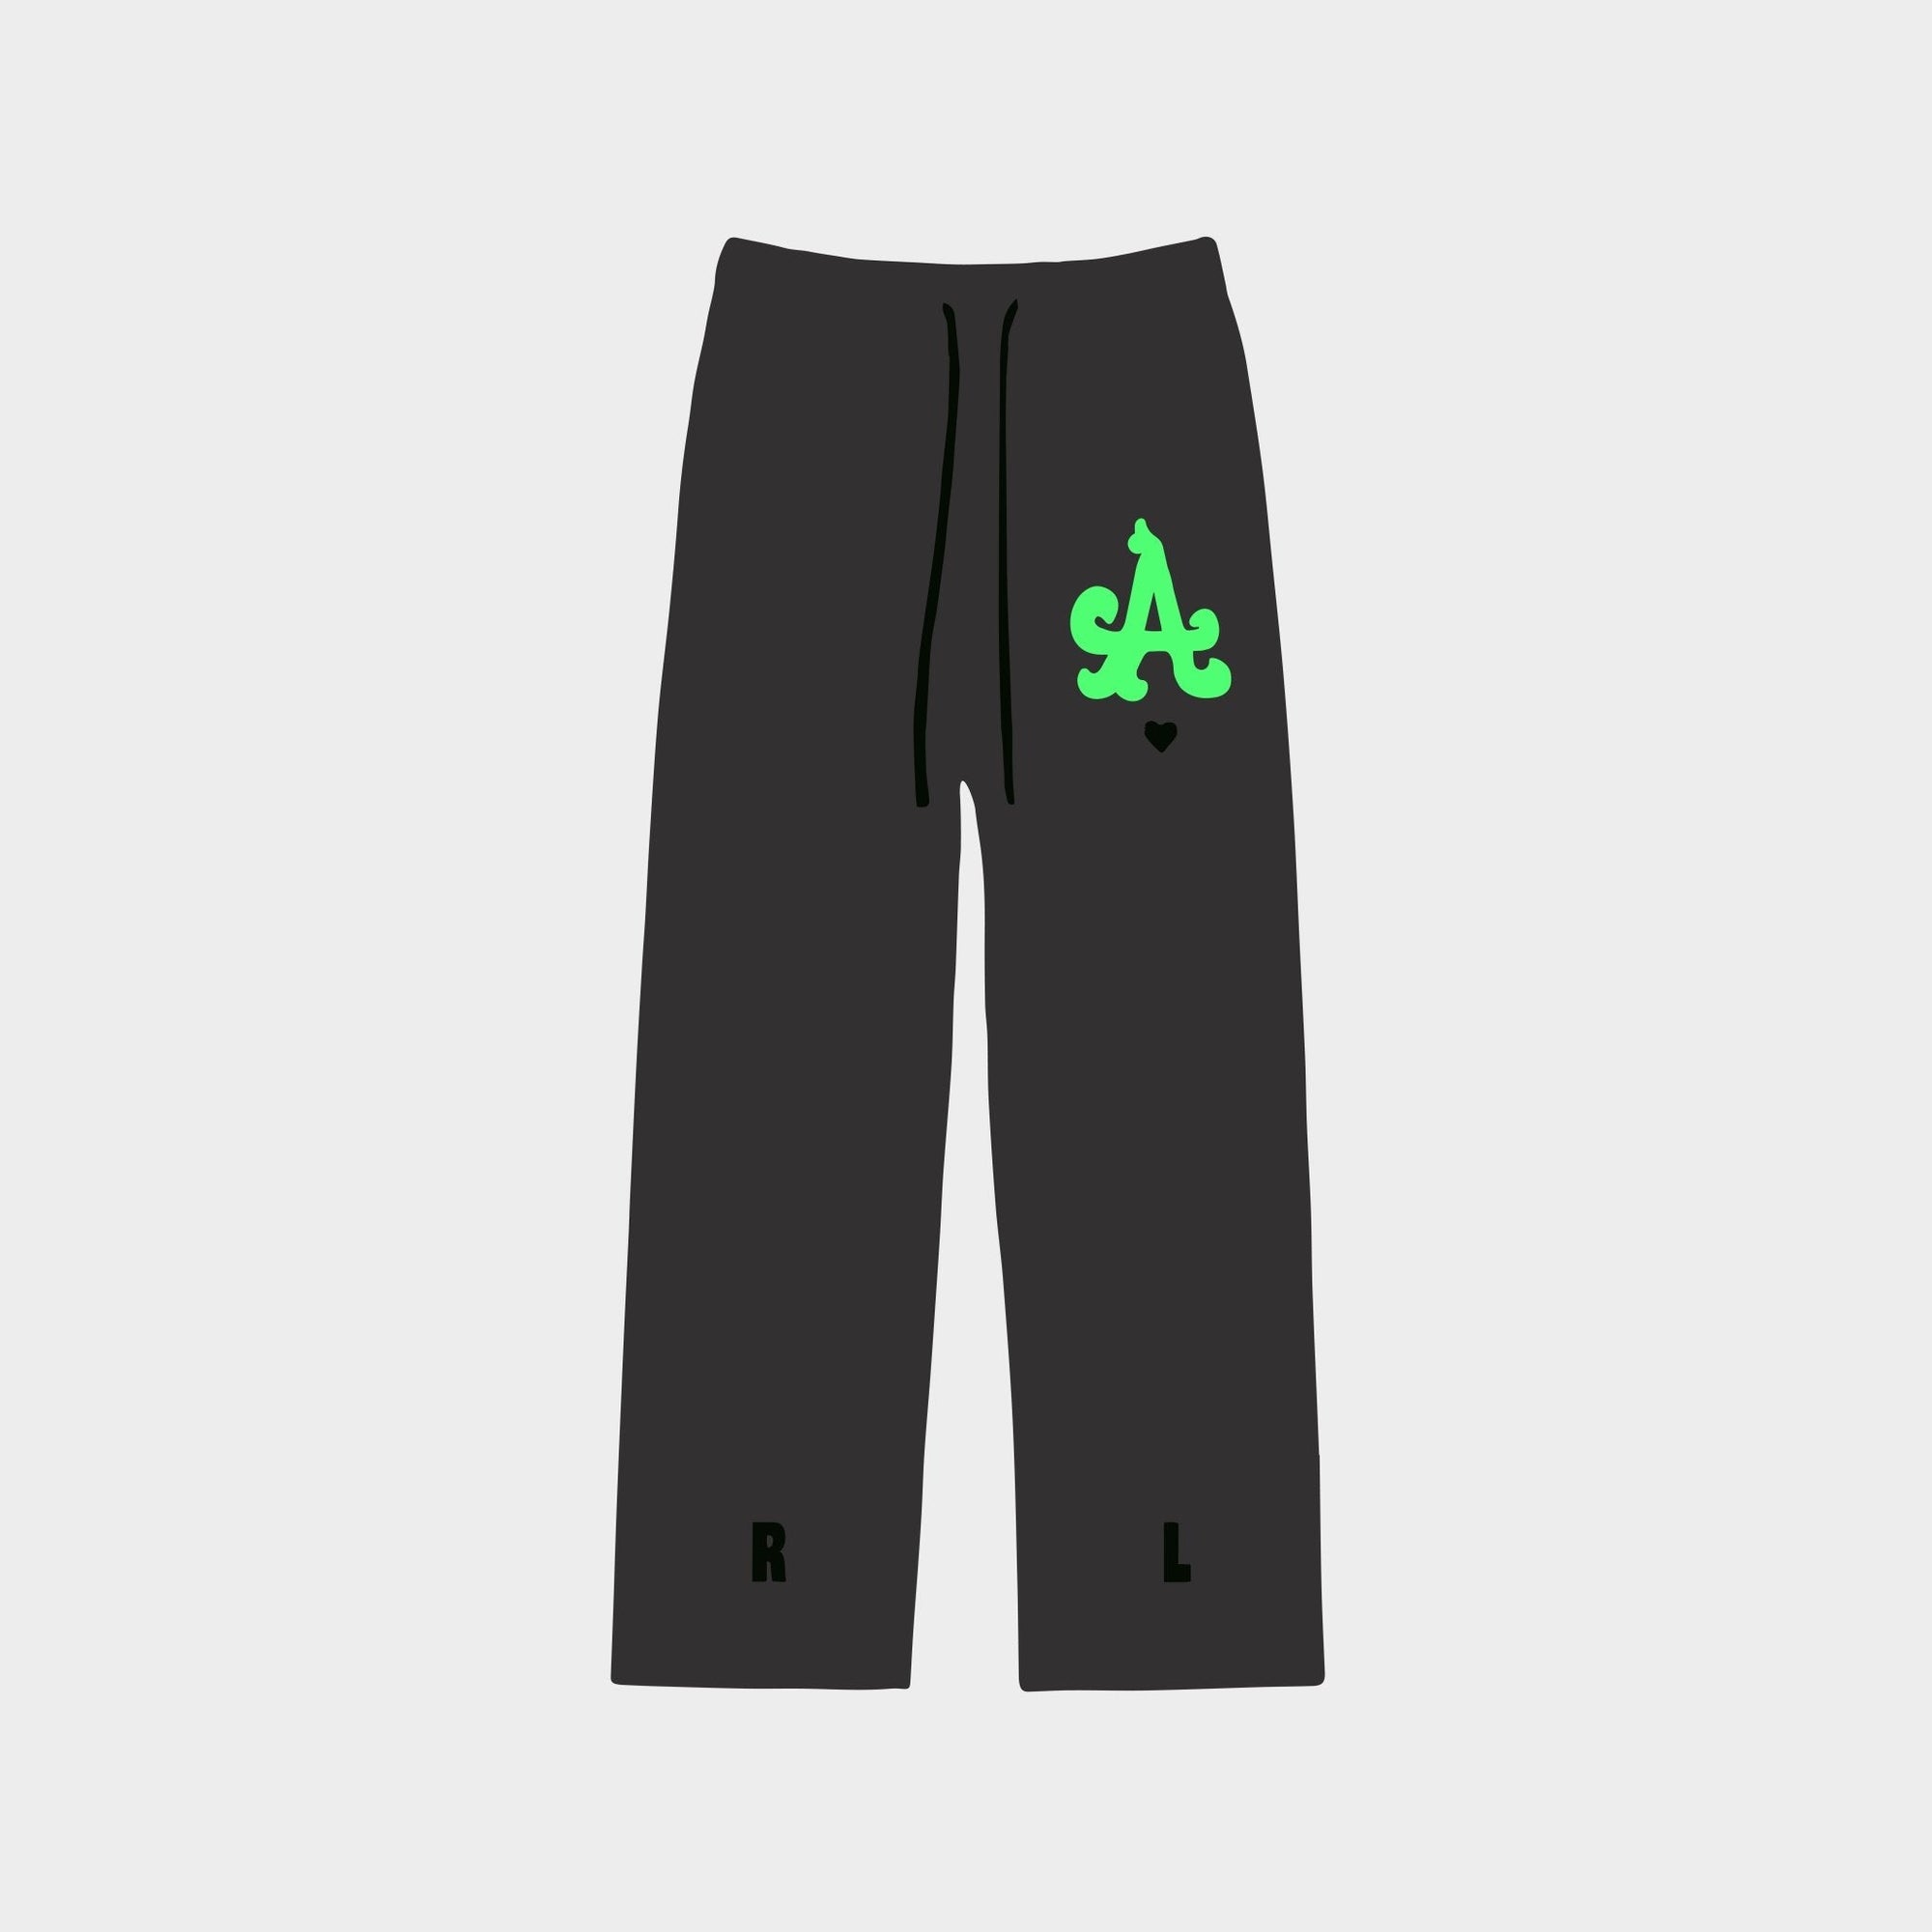 "Not ATL" Straight Leg Pant - RED LETTERS